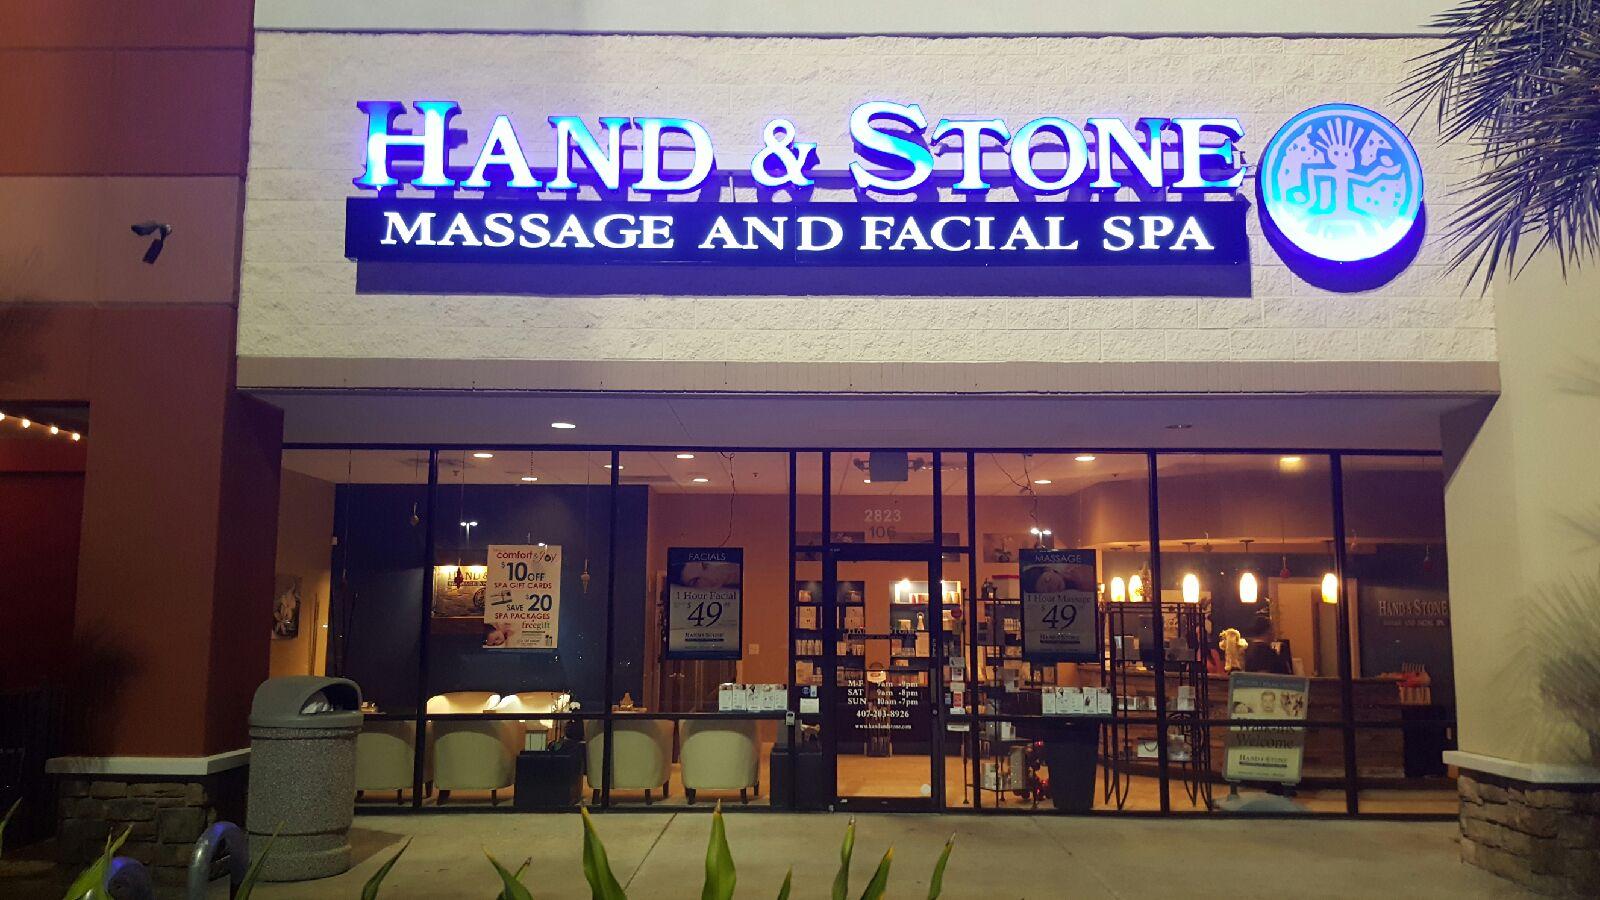 Hand and Stone Massage and Facial Spa Coupons near me in ...